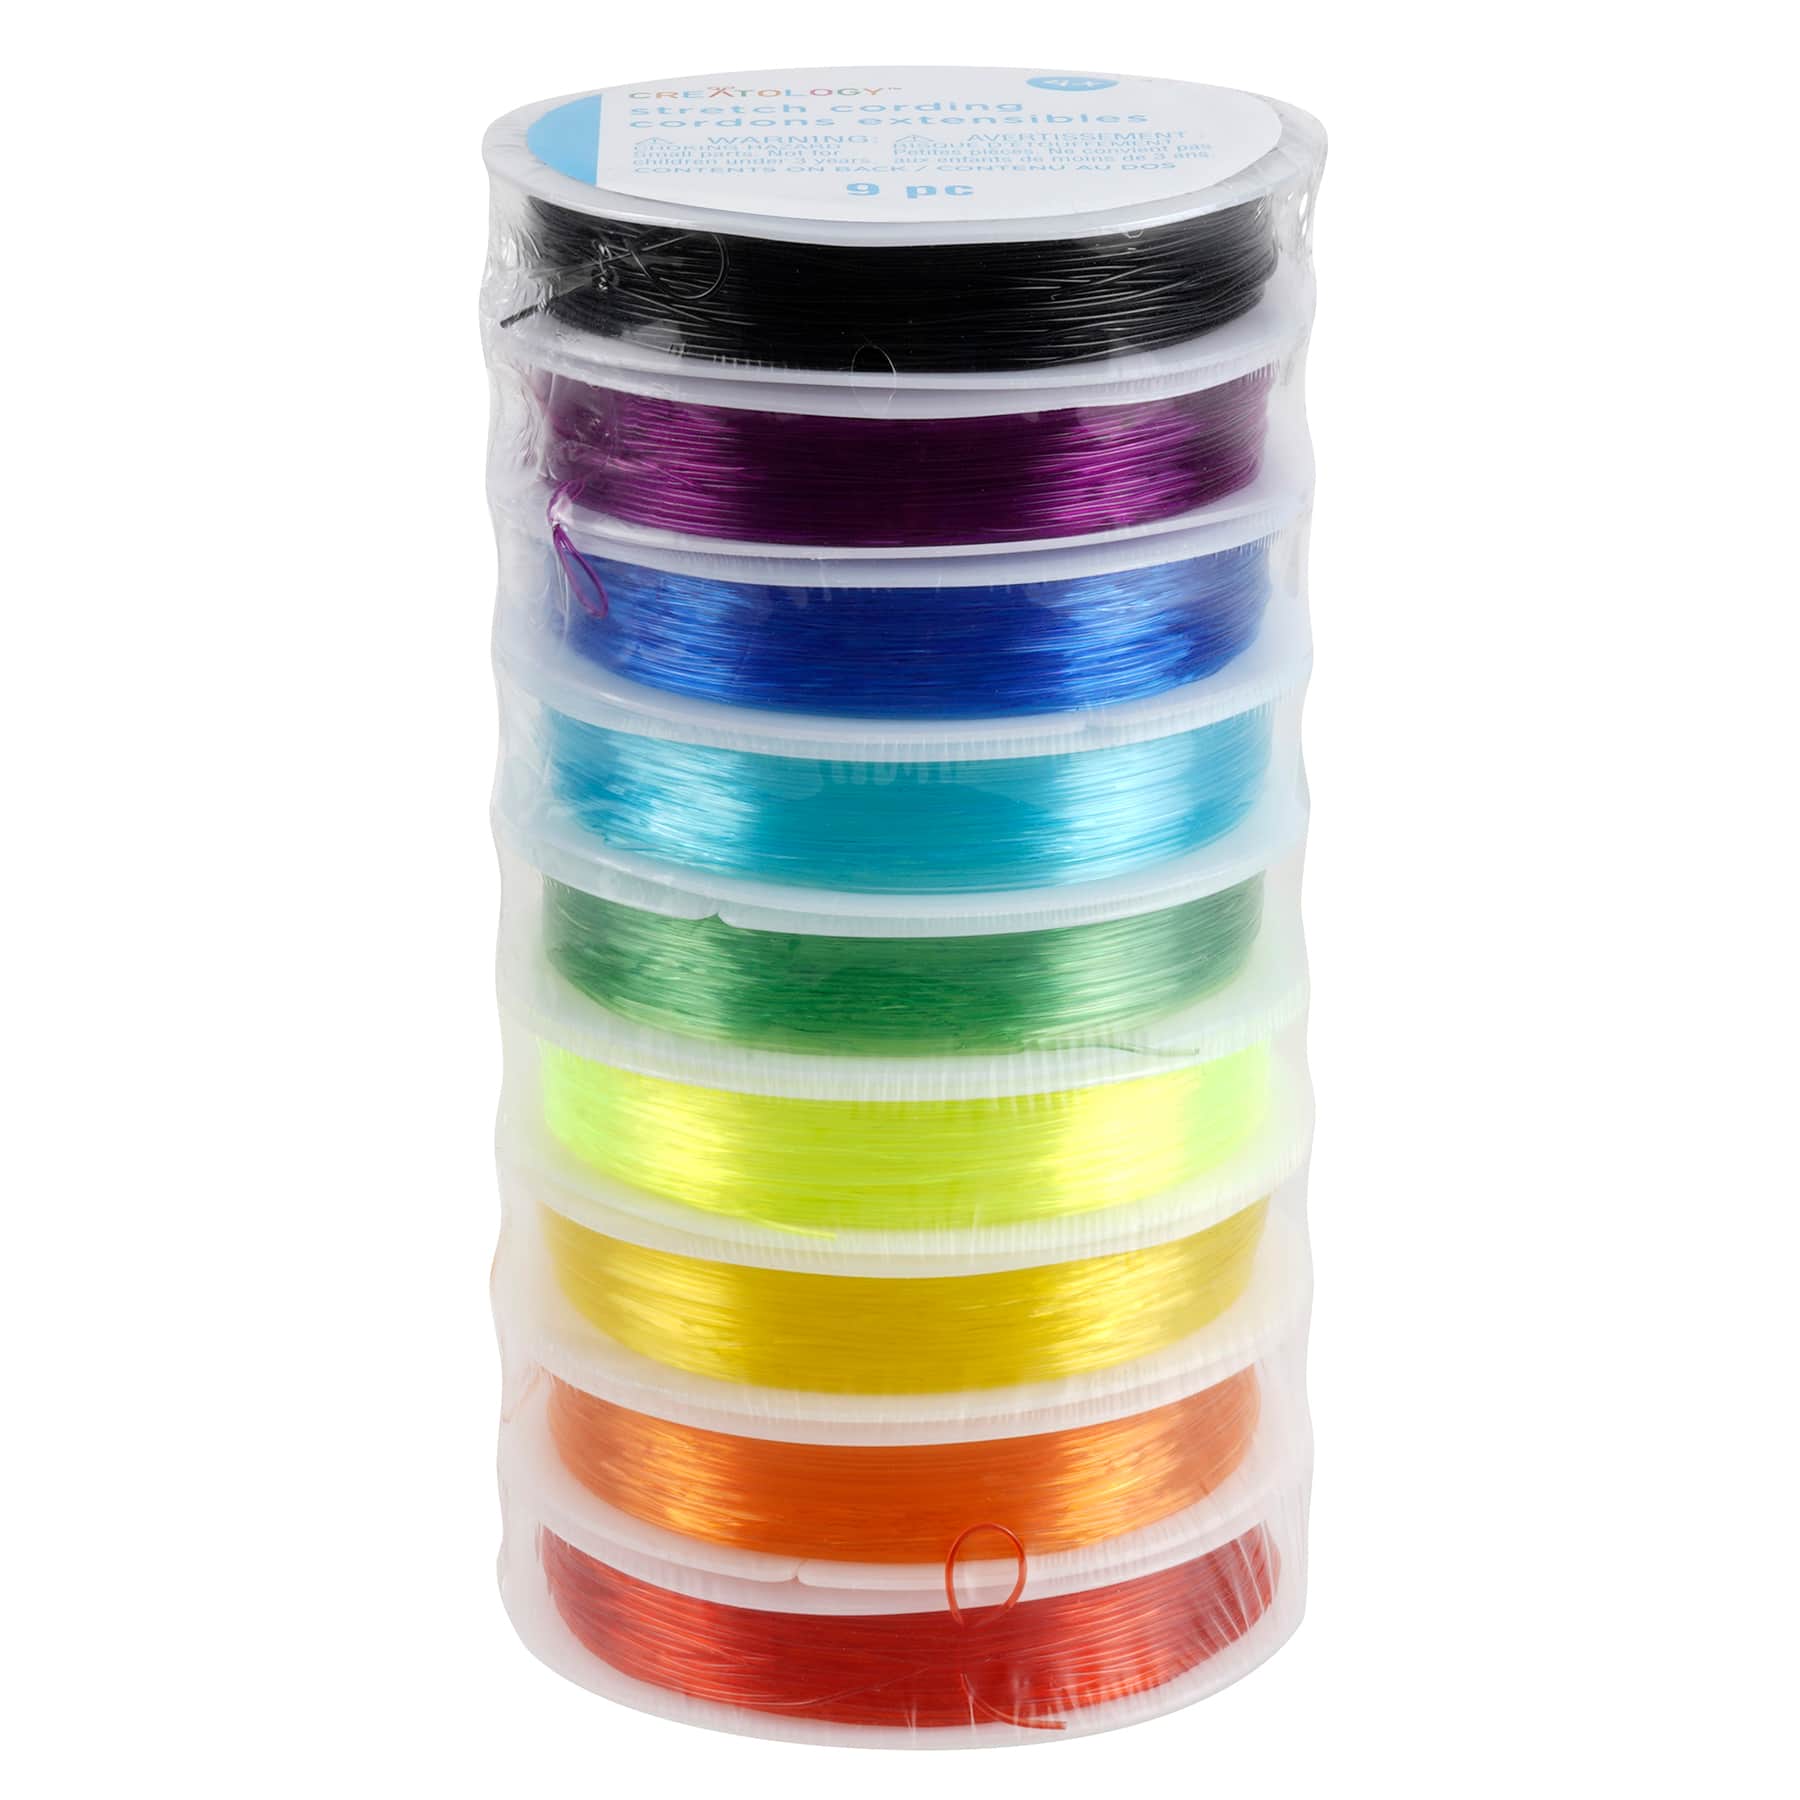 New Creatology Super Thick 2mm Elastic Cord Bright Colors (Includes 1  Package)